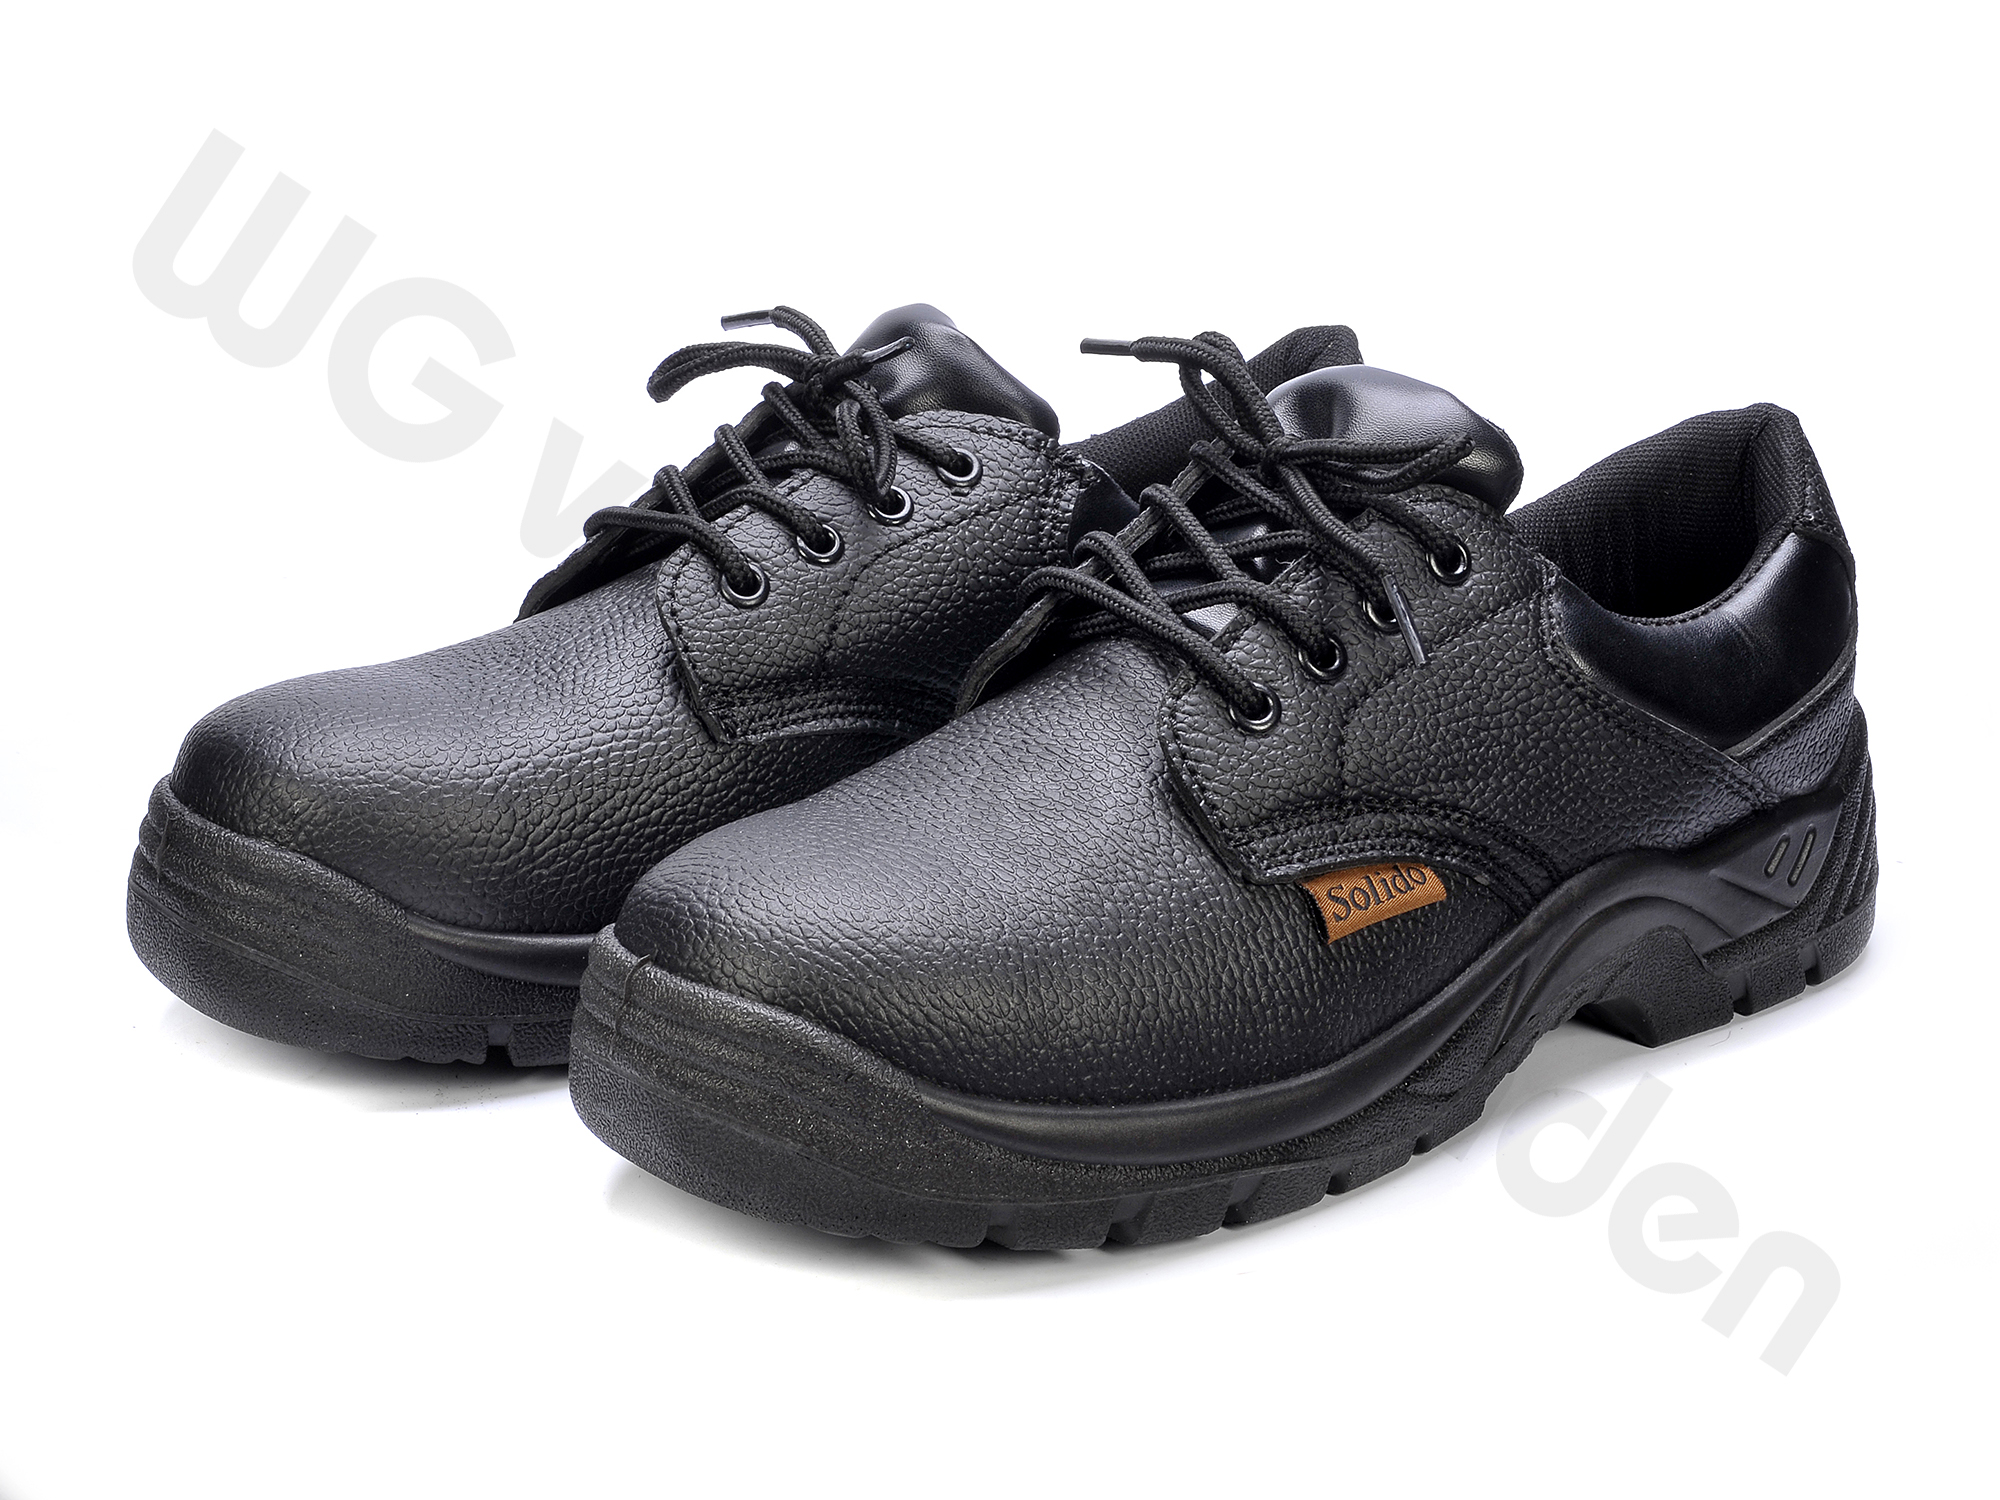 880604 SHOES SAFETY S1 WITH STEEL TOE SIZE 41 / 26.5CM CE